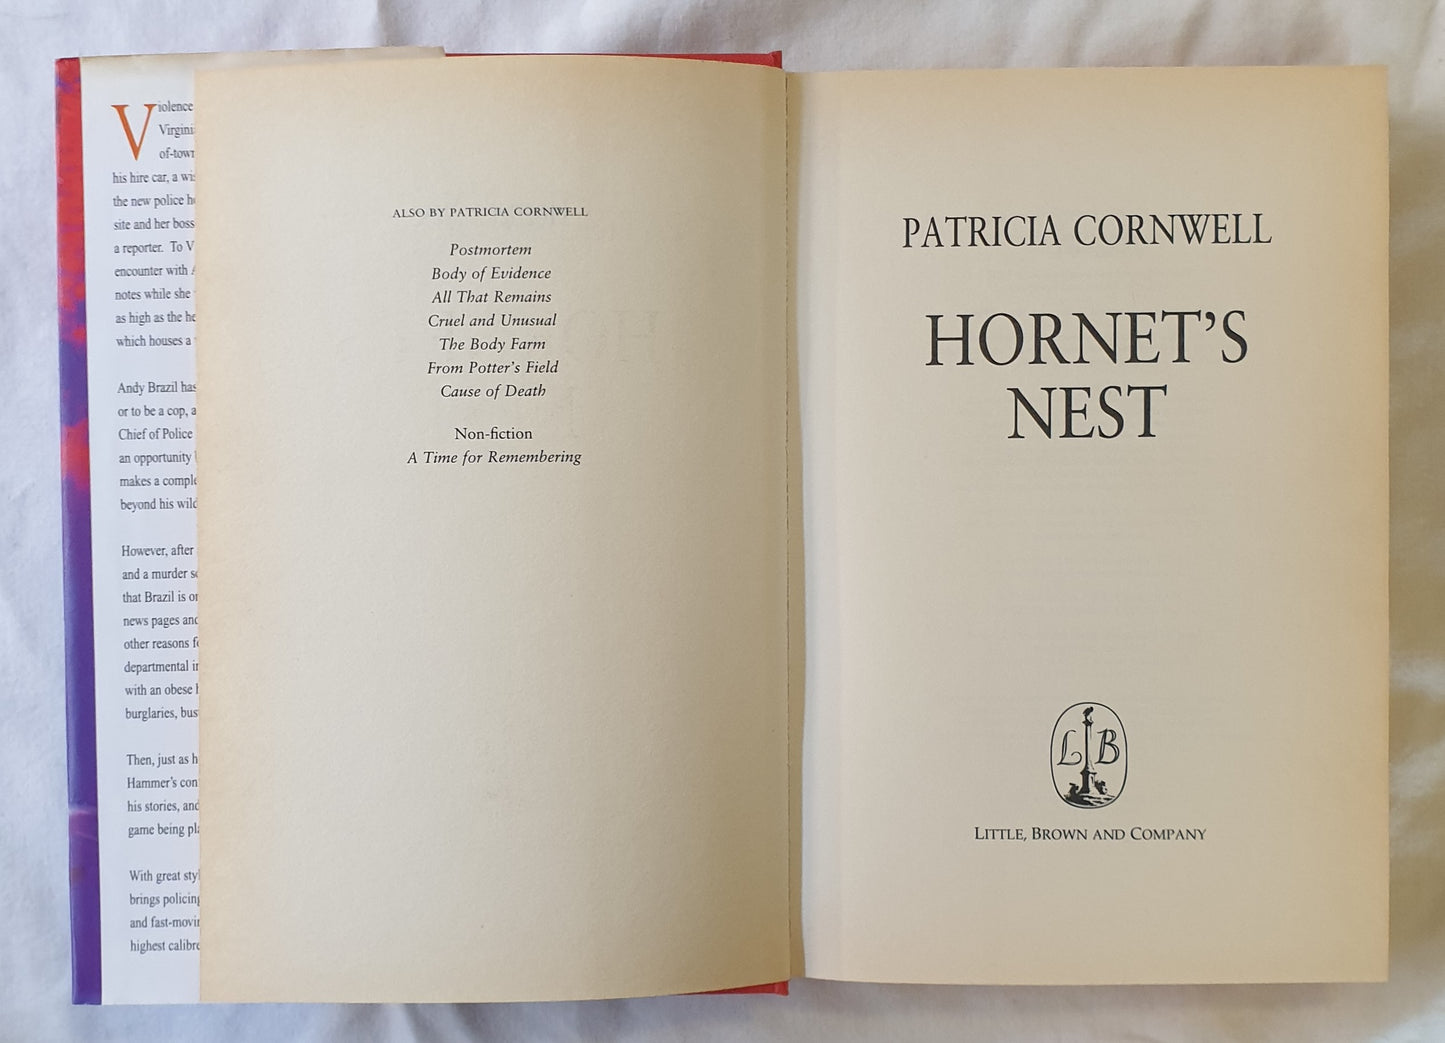 Hornet’s Nest by Patricia Cornwell